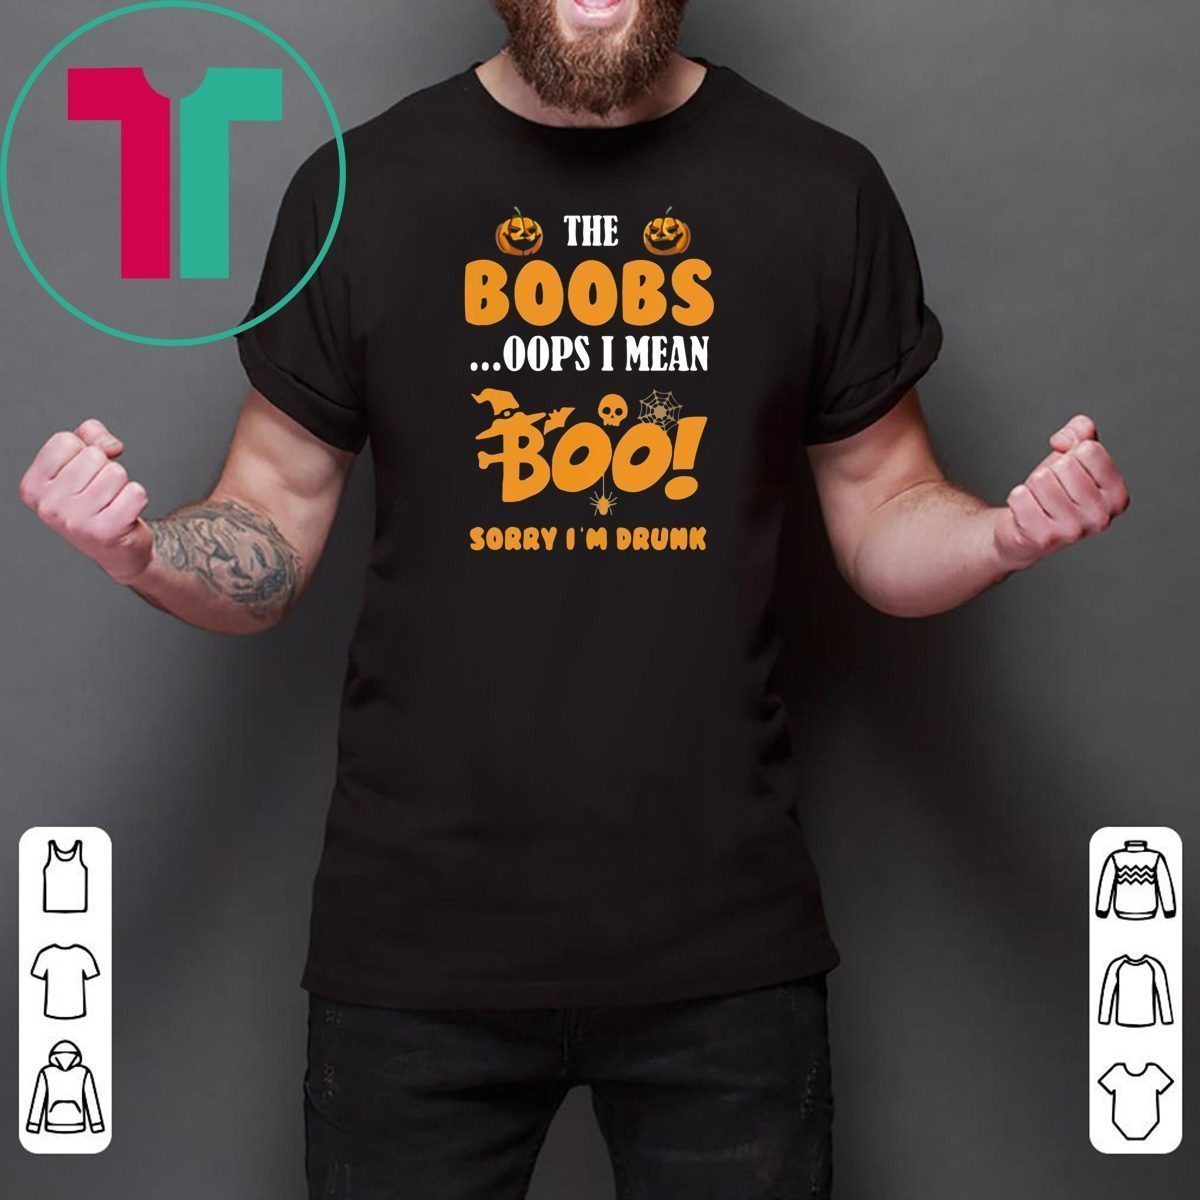 I'm Just Here for the Boobs Shirt, Oops I Mean Boo Shirt, Sorry I